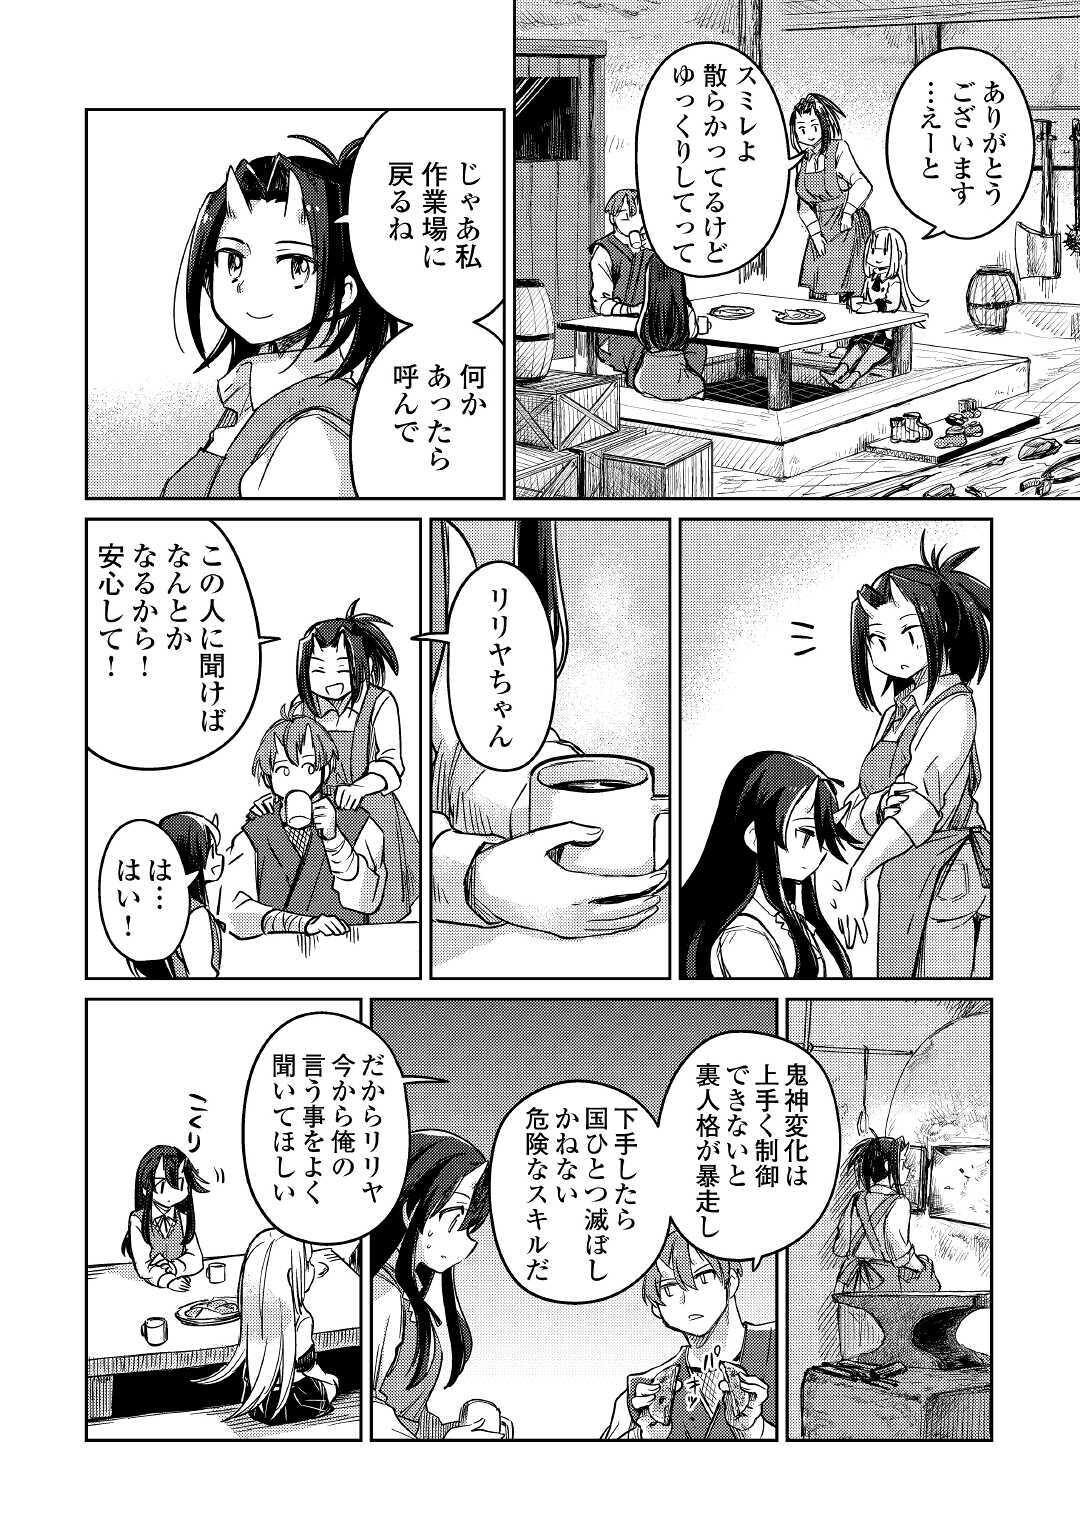 The Former Structural Researcher’s Story of Otherworldly Adventure 第31話 - Page 20